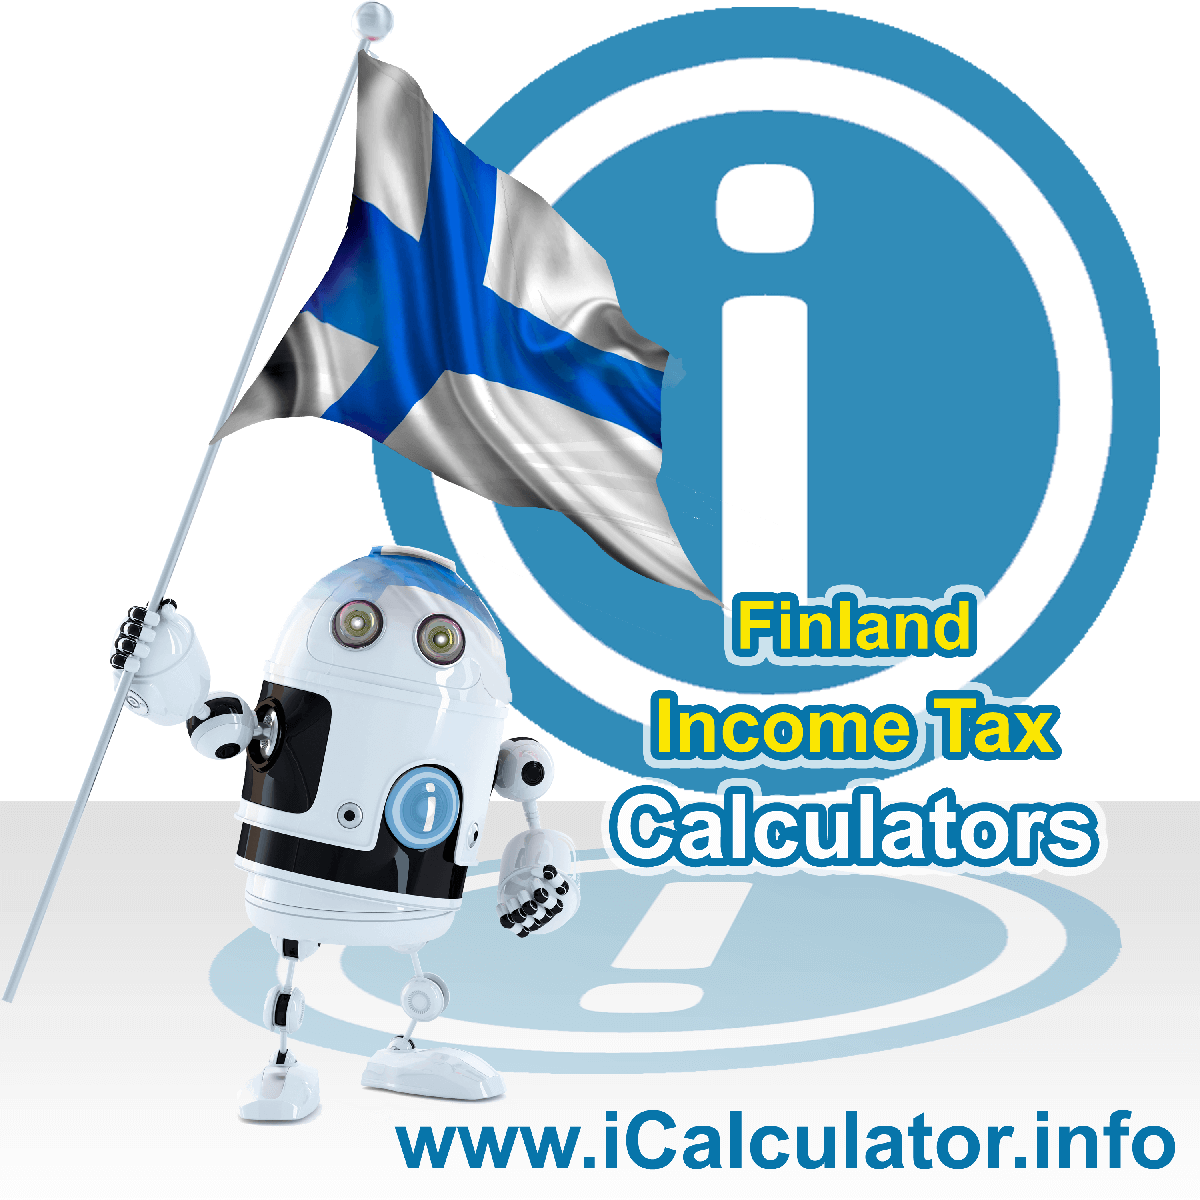 Finland Income Tax Calculator. This image shows a new employer in Finland calculating the annual payroll costs based on multiple payroll payments in one year in Finland using the Finland income tax calculator to understand their payroll costs in Finland in 2023